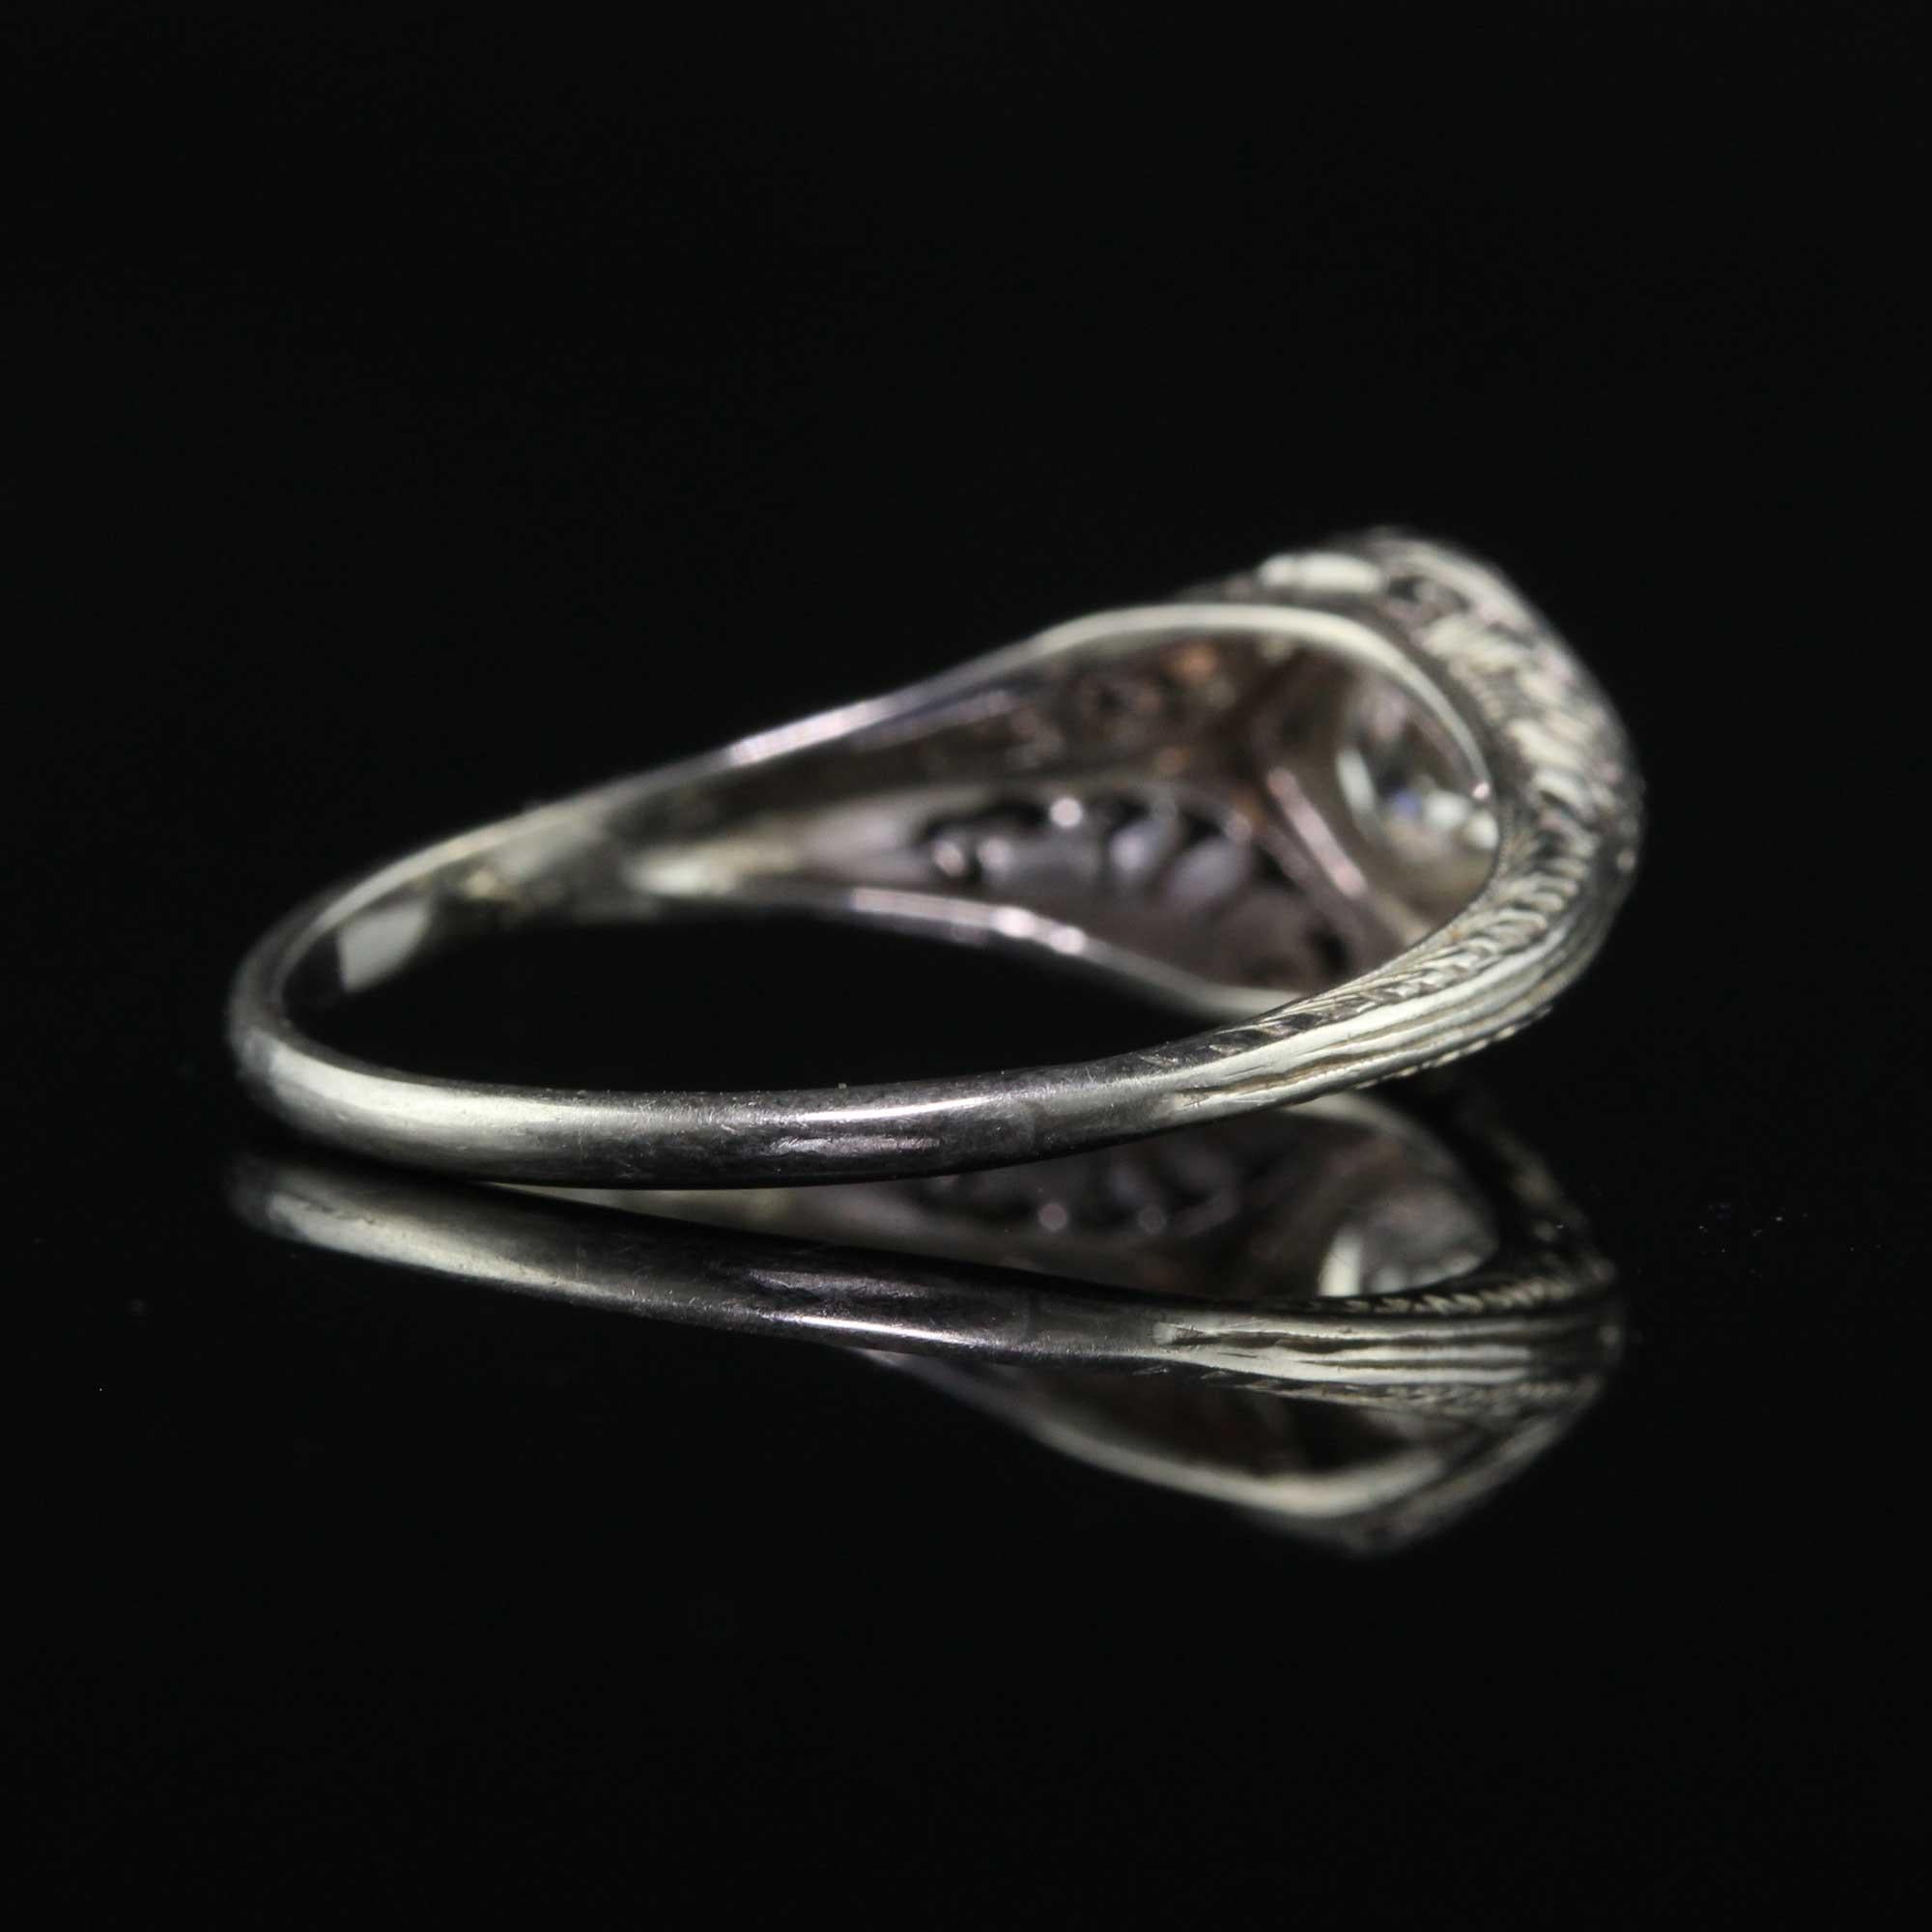 Antique Edwardian Platinum Old European Diamond Filigree Engagement Ring In Good Condition For Sale In Great Neck, NY